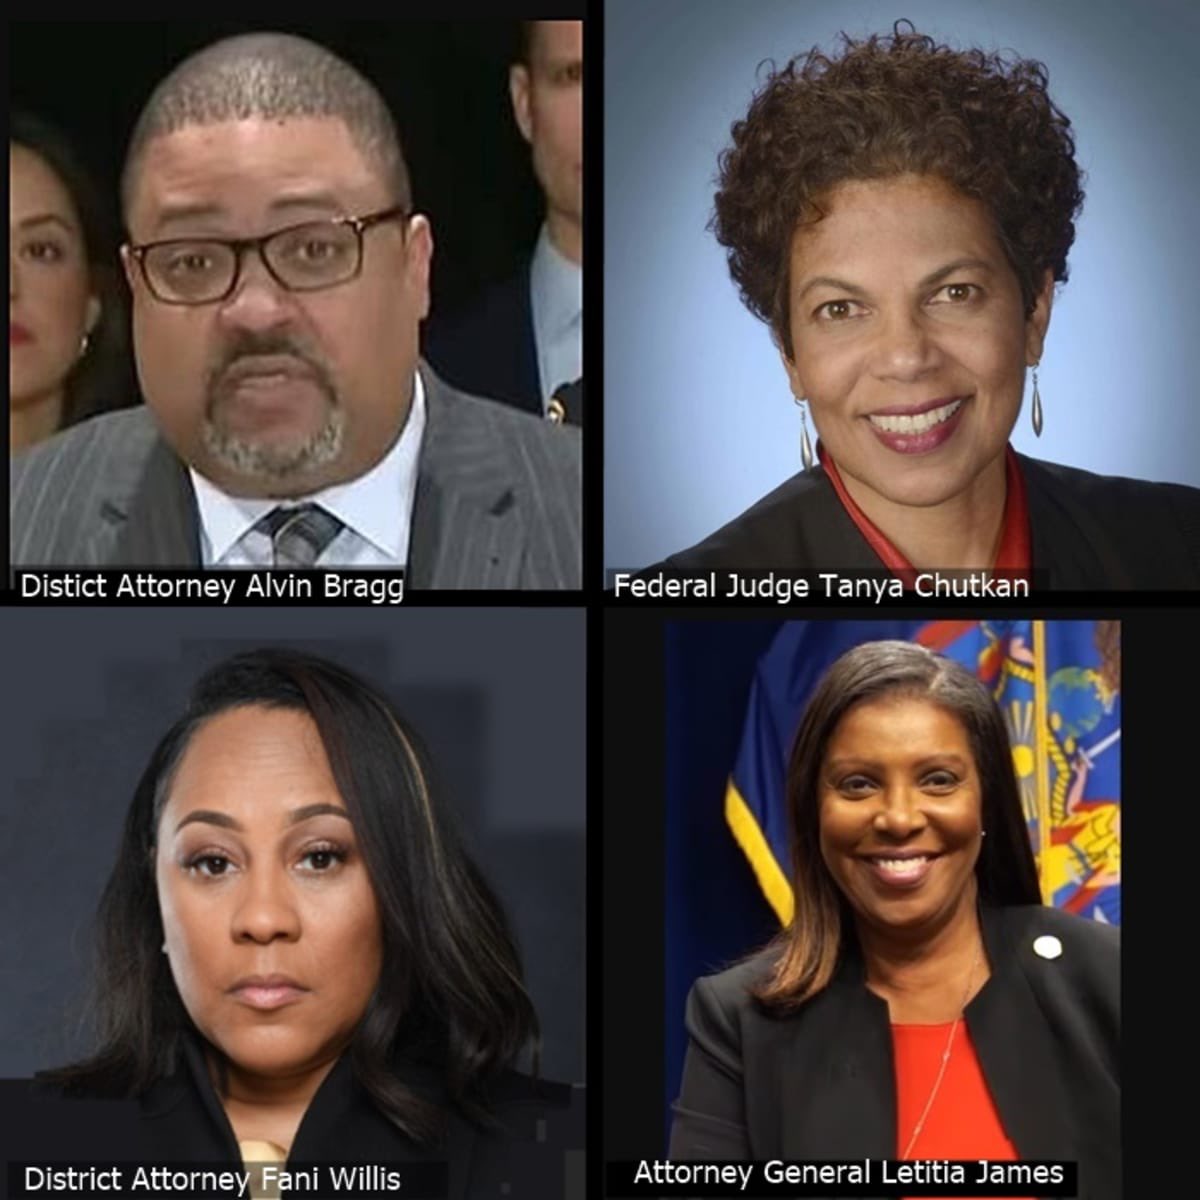 Who else is having a hard time trying to keep up with all those criminal #TrumpTrials ?

DA #AlvinBragg, Federal Judge #TanyaChutkan, DA #FaniWillis, AG #LetitiaJames, and don’t forget Special Prosecutor #JackSmith.